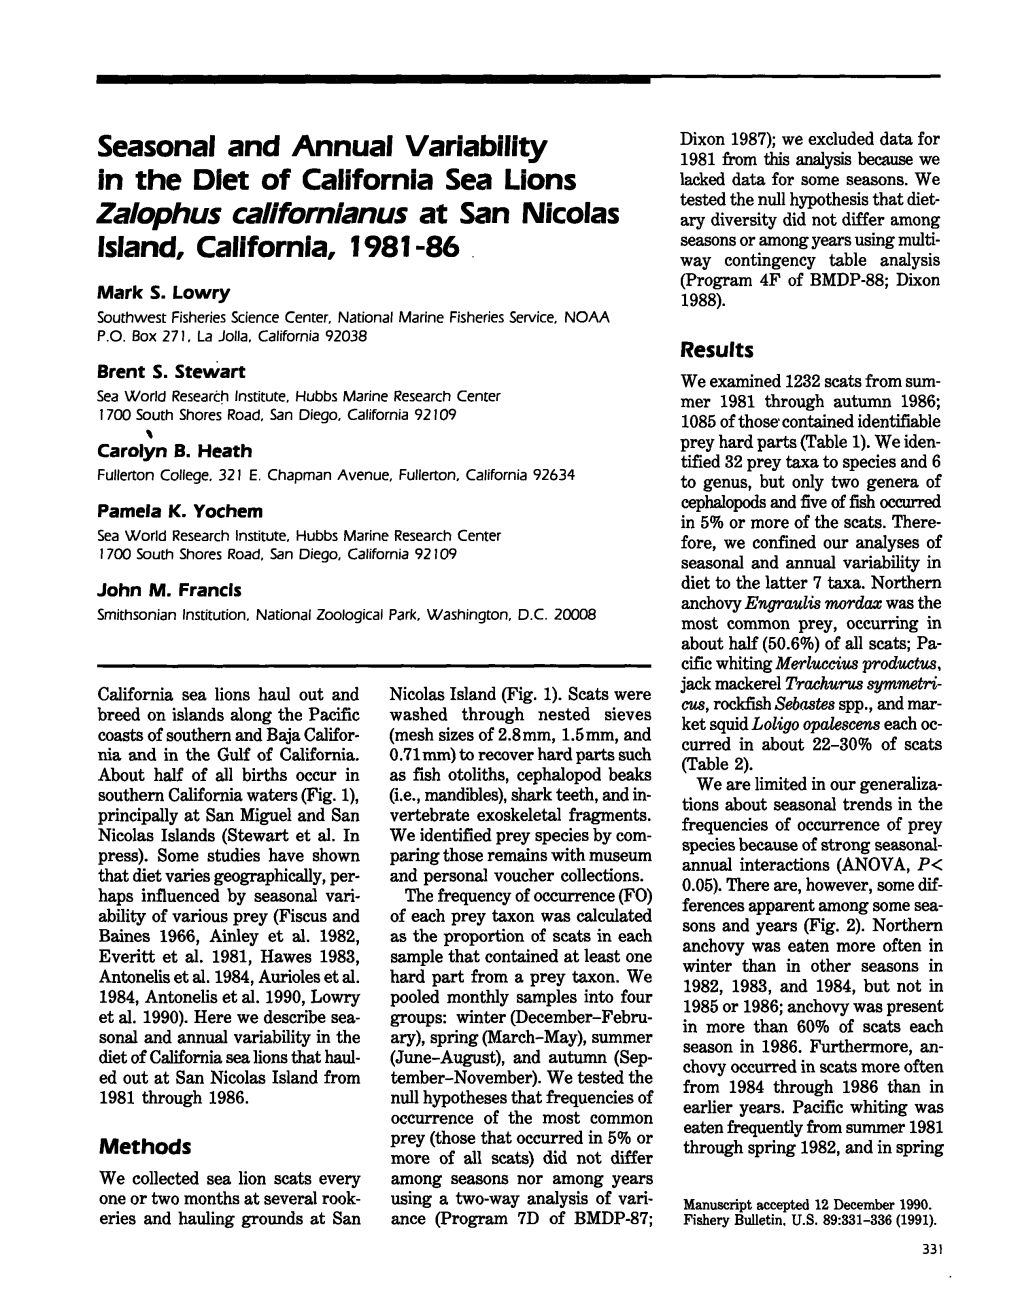 Seasonal and Annual Variability in the Diet of California Sea Lions